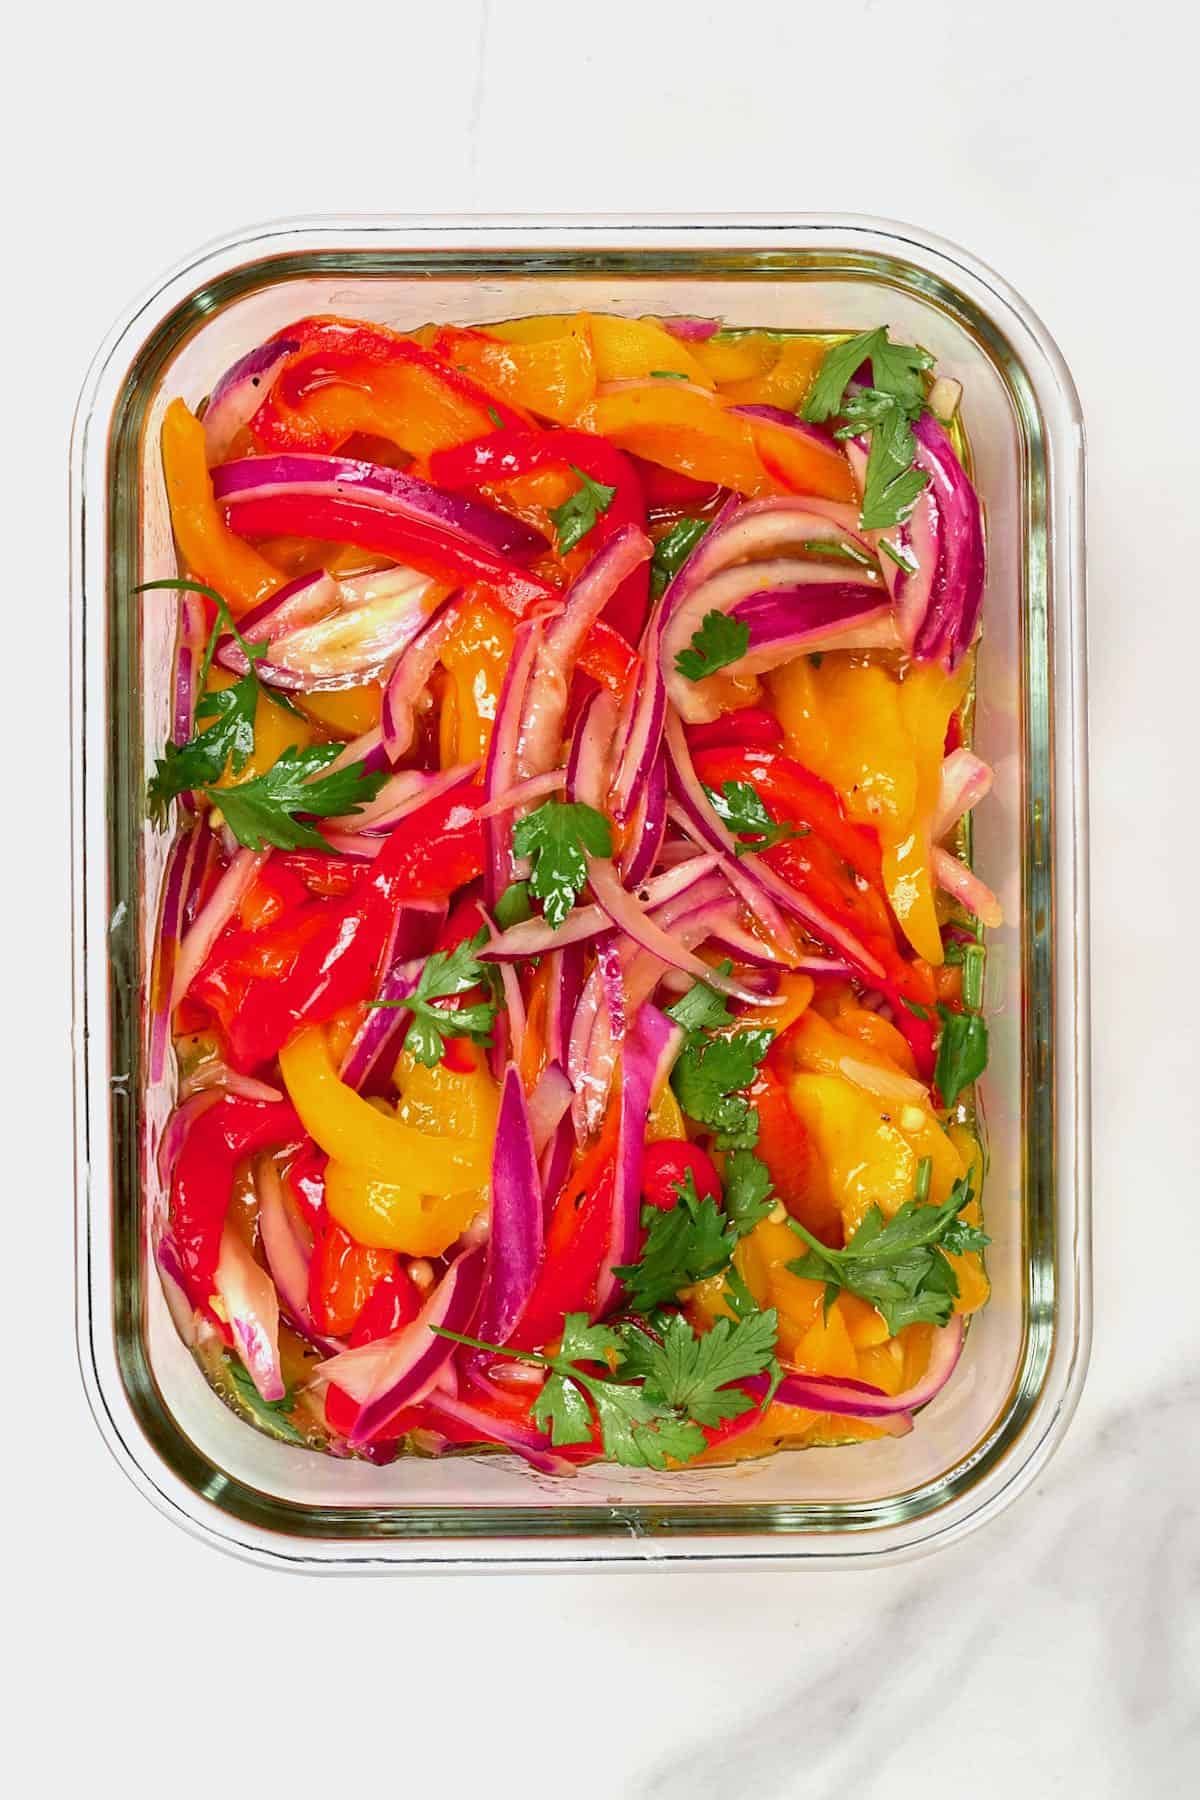 Roasted pepper salad in a container